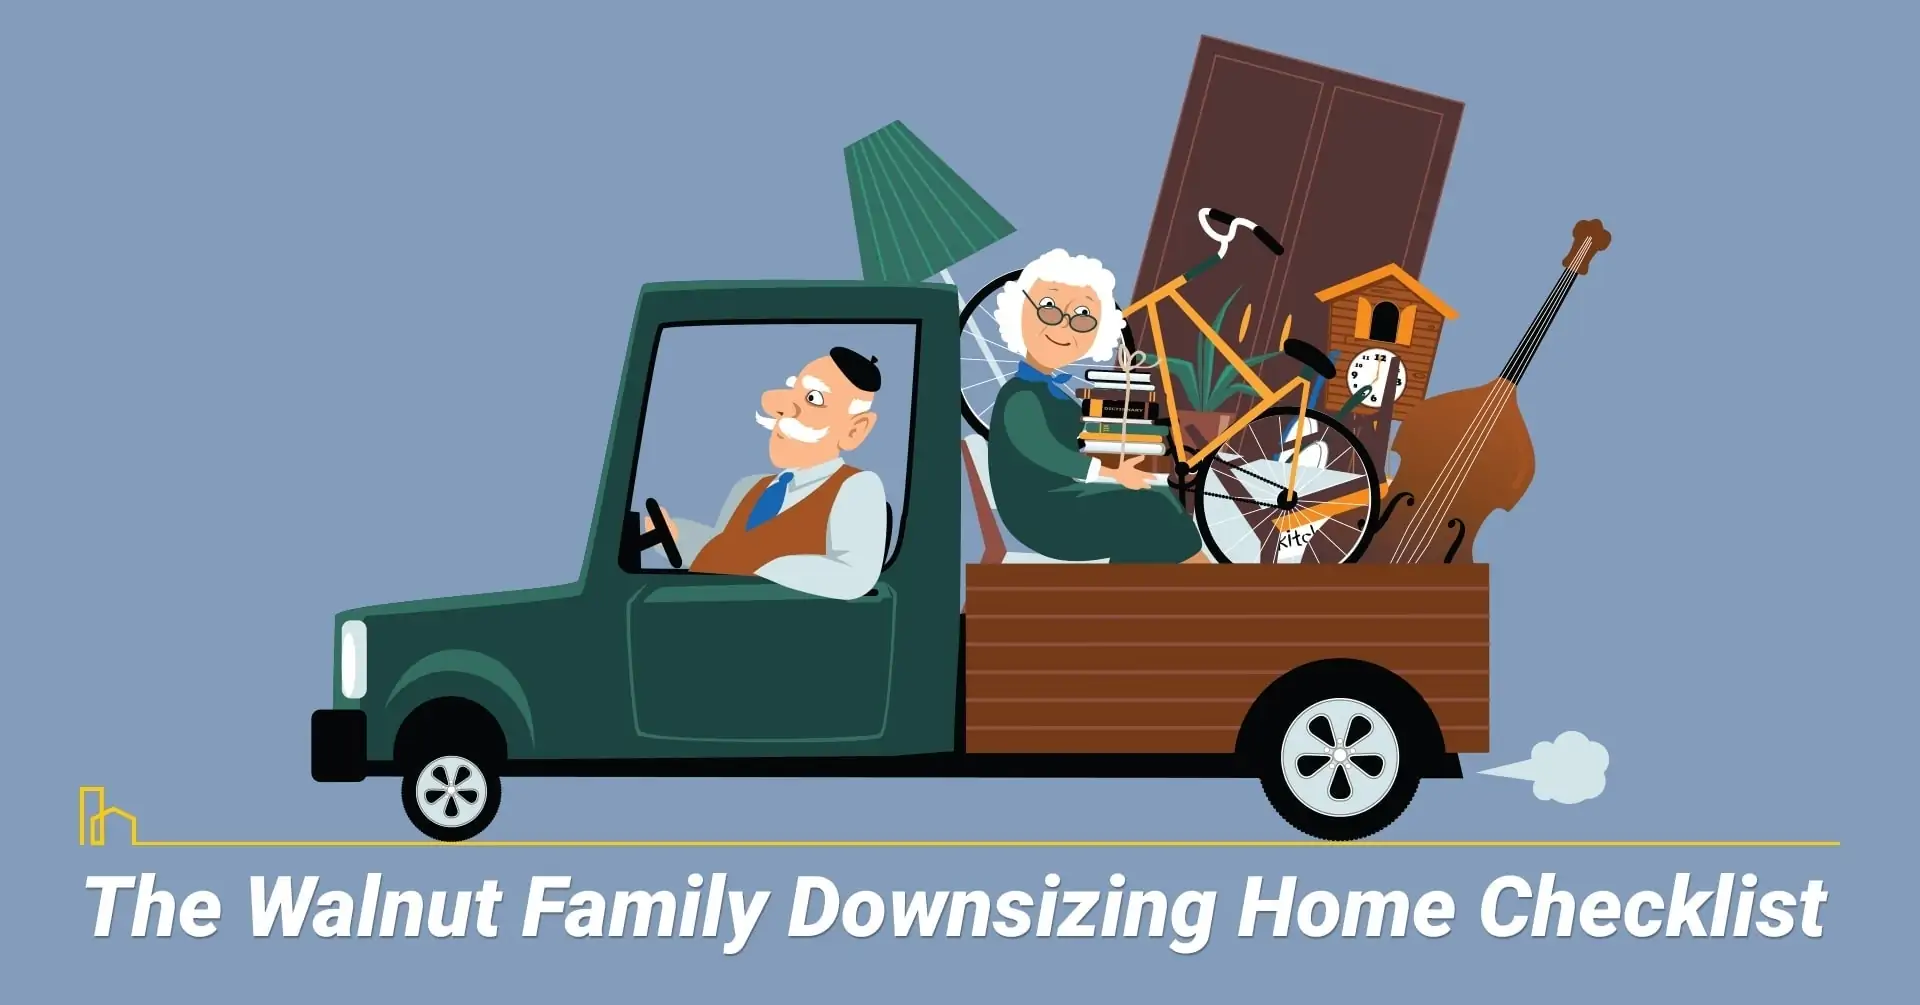 The Walnut Family Downsizing Home Checklist, things to do when downsizing